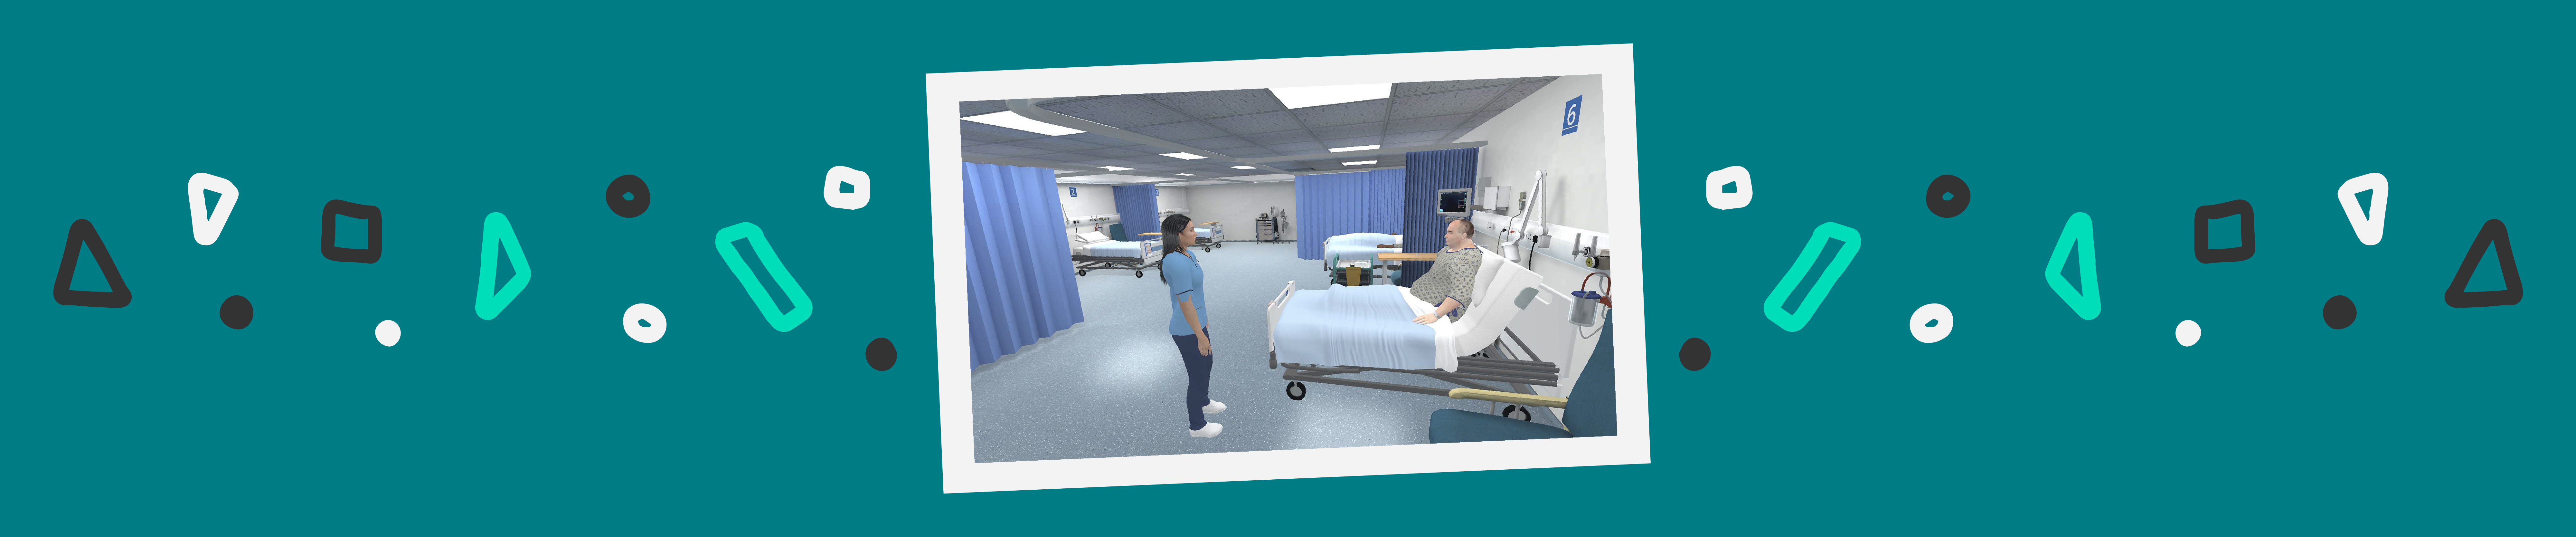 snapshot of caring for a patient in a virtual reality hospital setting